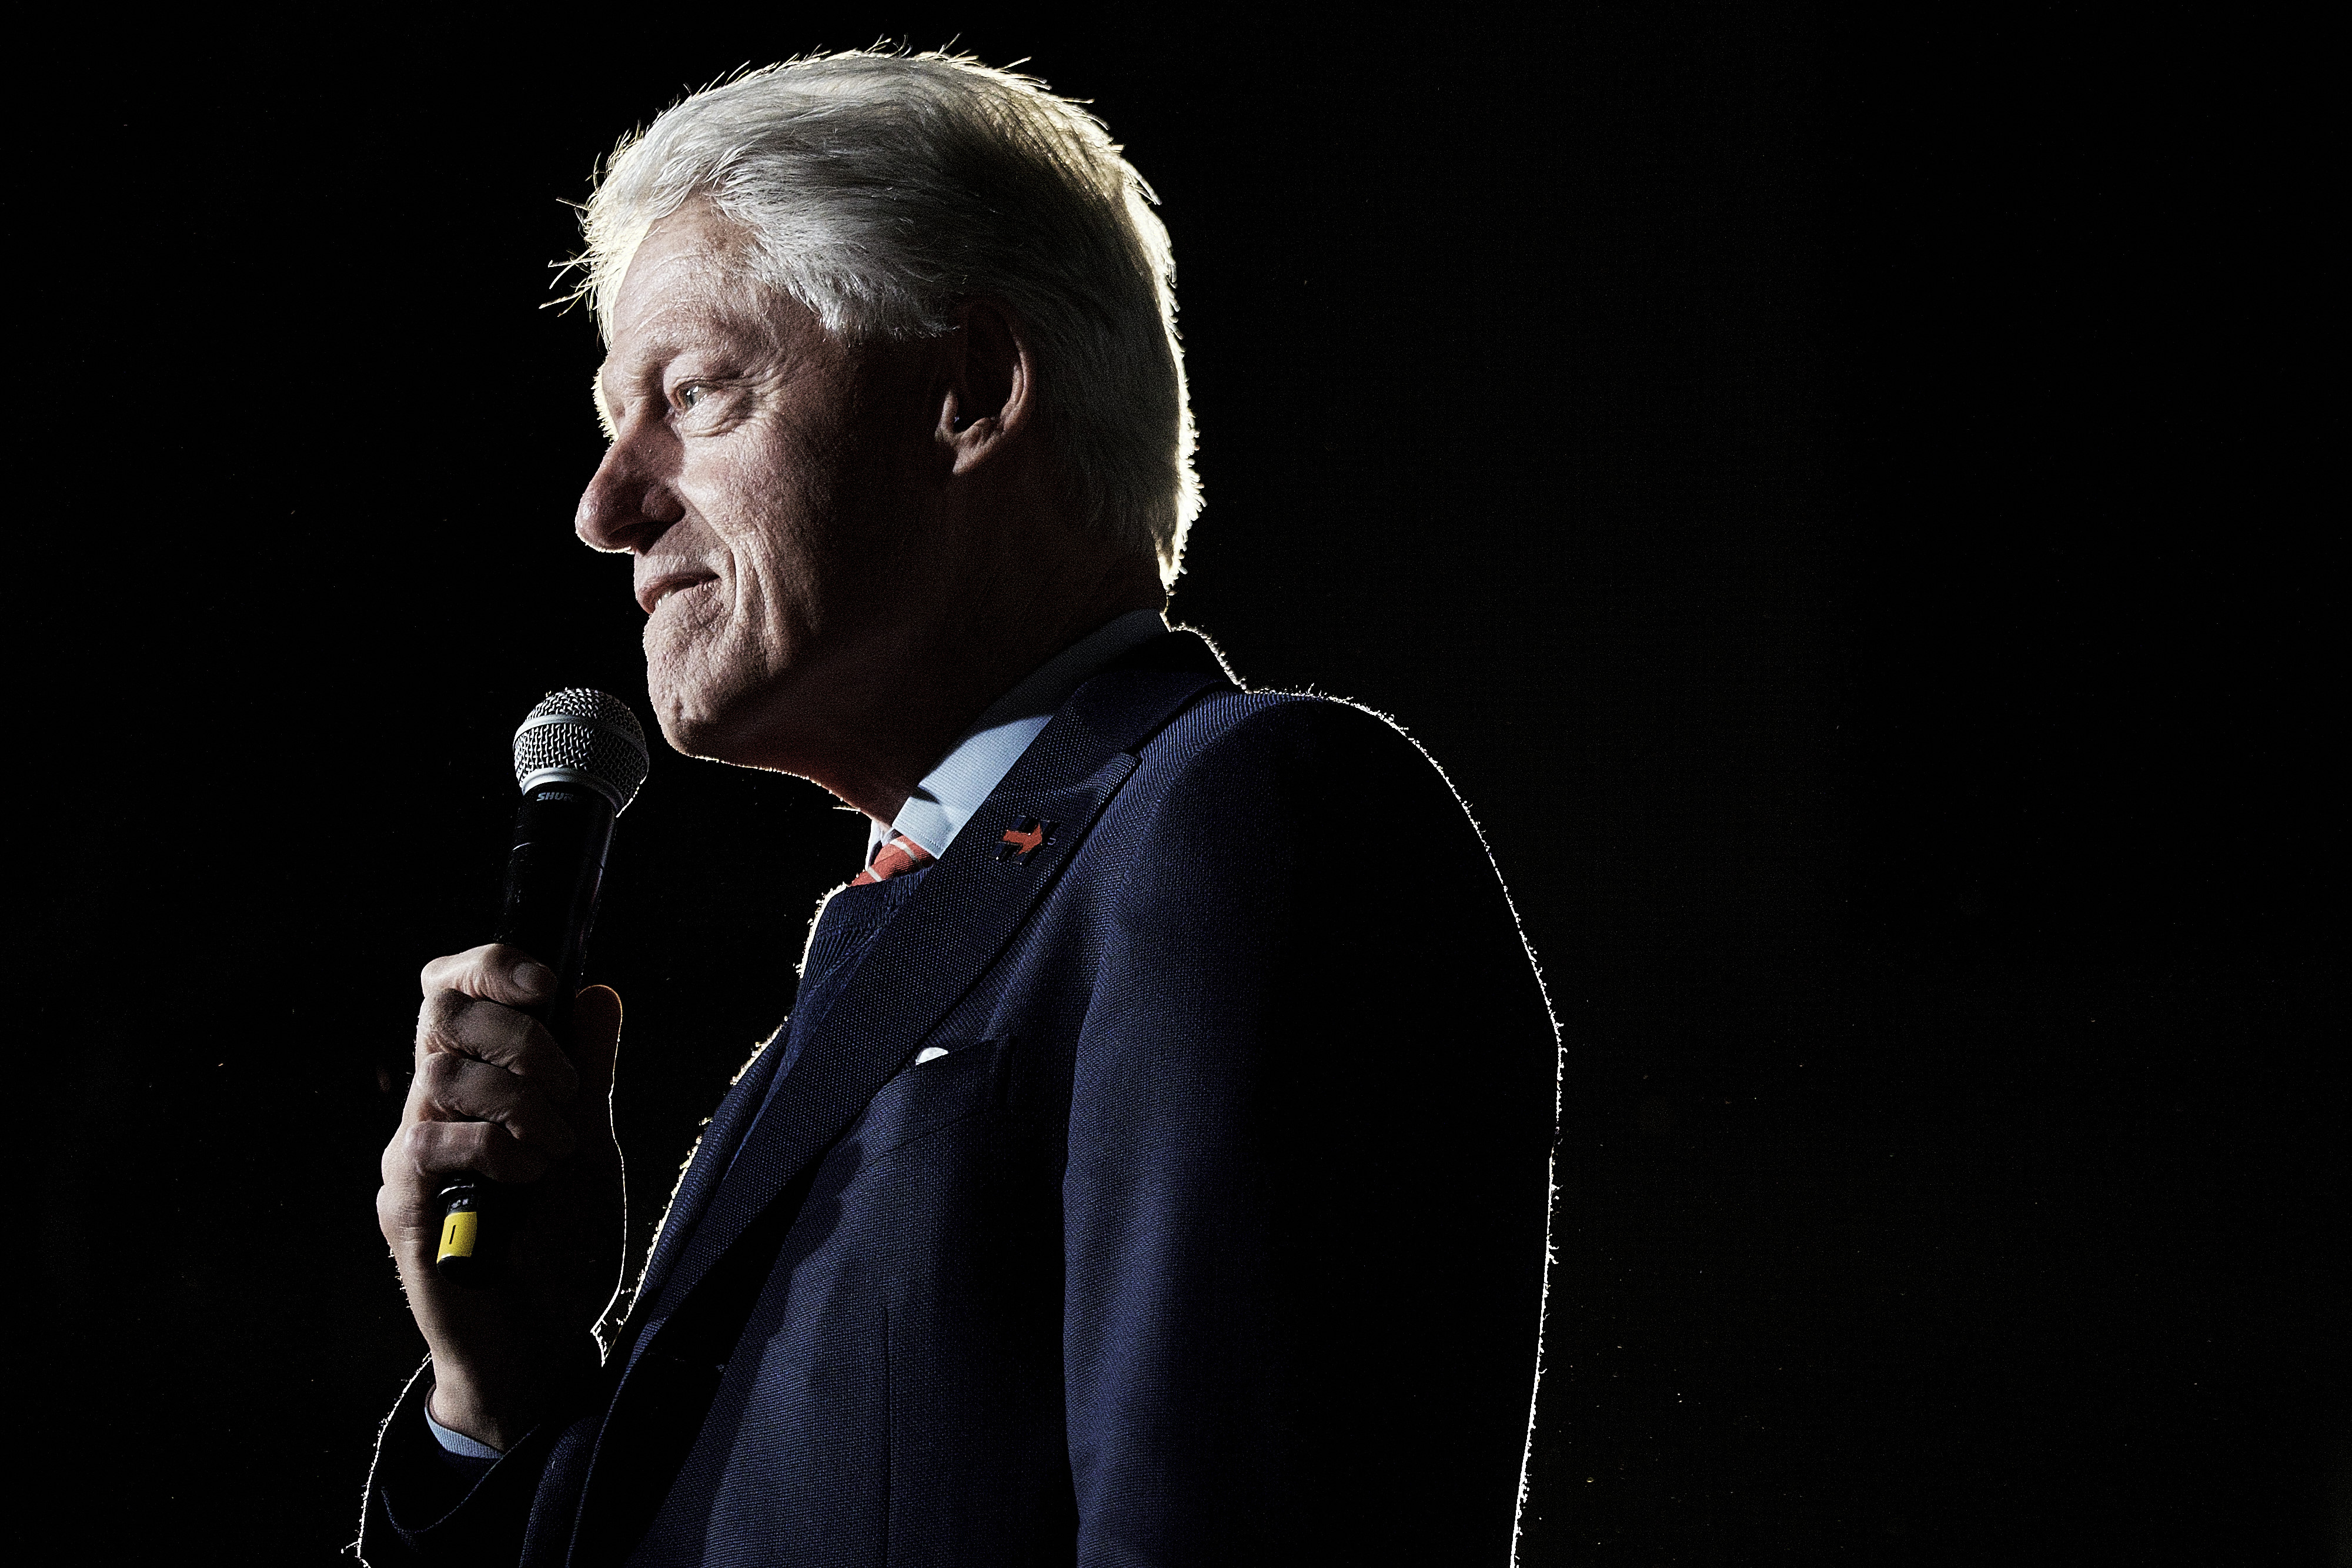 Bill Clinton, former U.S. President and husband of former U.S. Secretary of State and 2016 Democratic presidential candidate Hillary Clinton, speaks to the crowd, during a town hall event at the Columbia Museum of Art Boyd Plaza in Columbia, S.C., on Feb. 26, 2017. (Bloomberg via Getty Images)